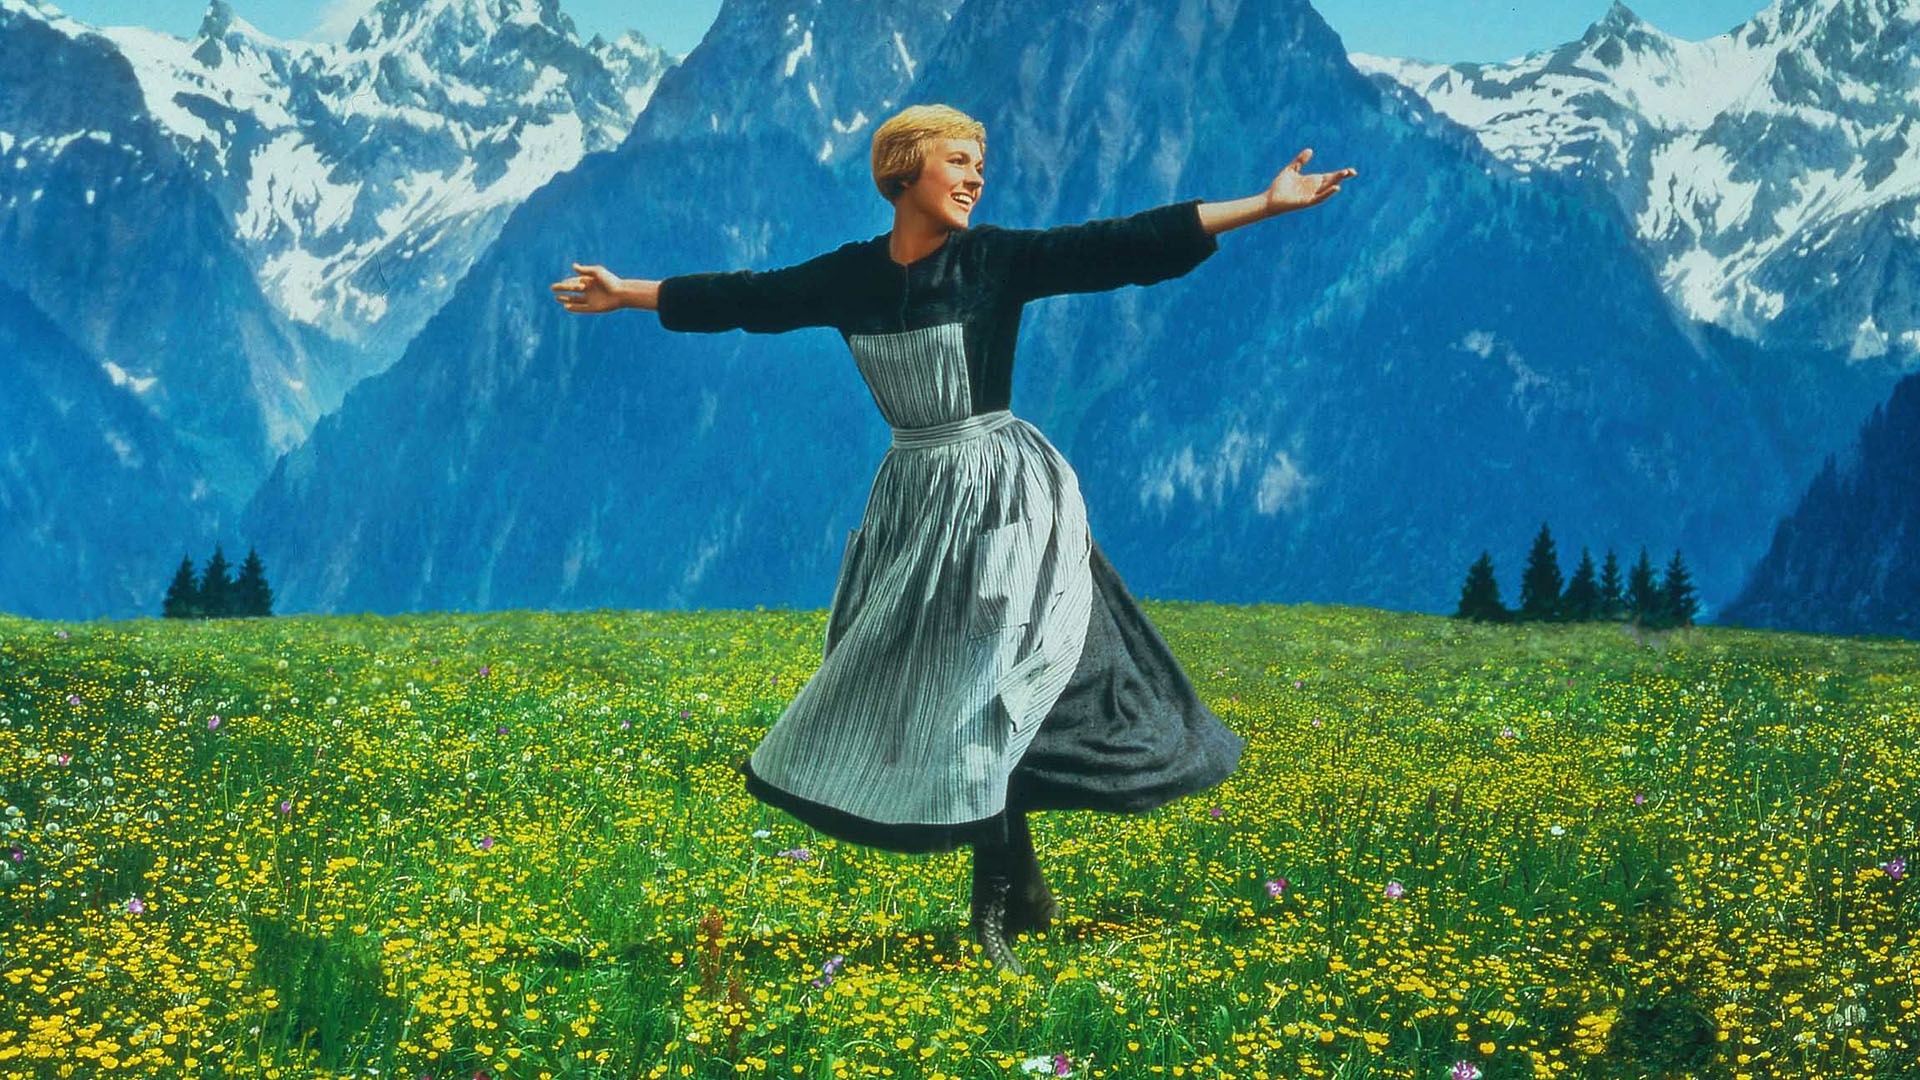 The Sound Of Music Gifs. 